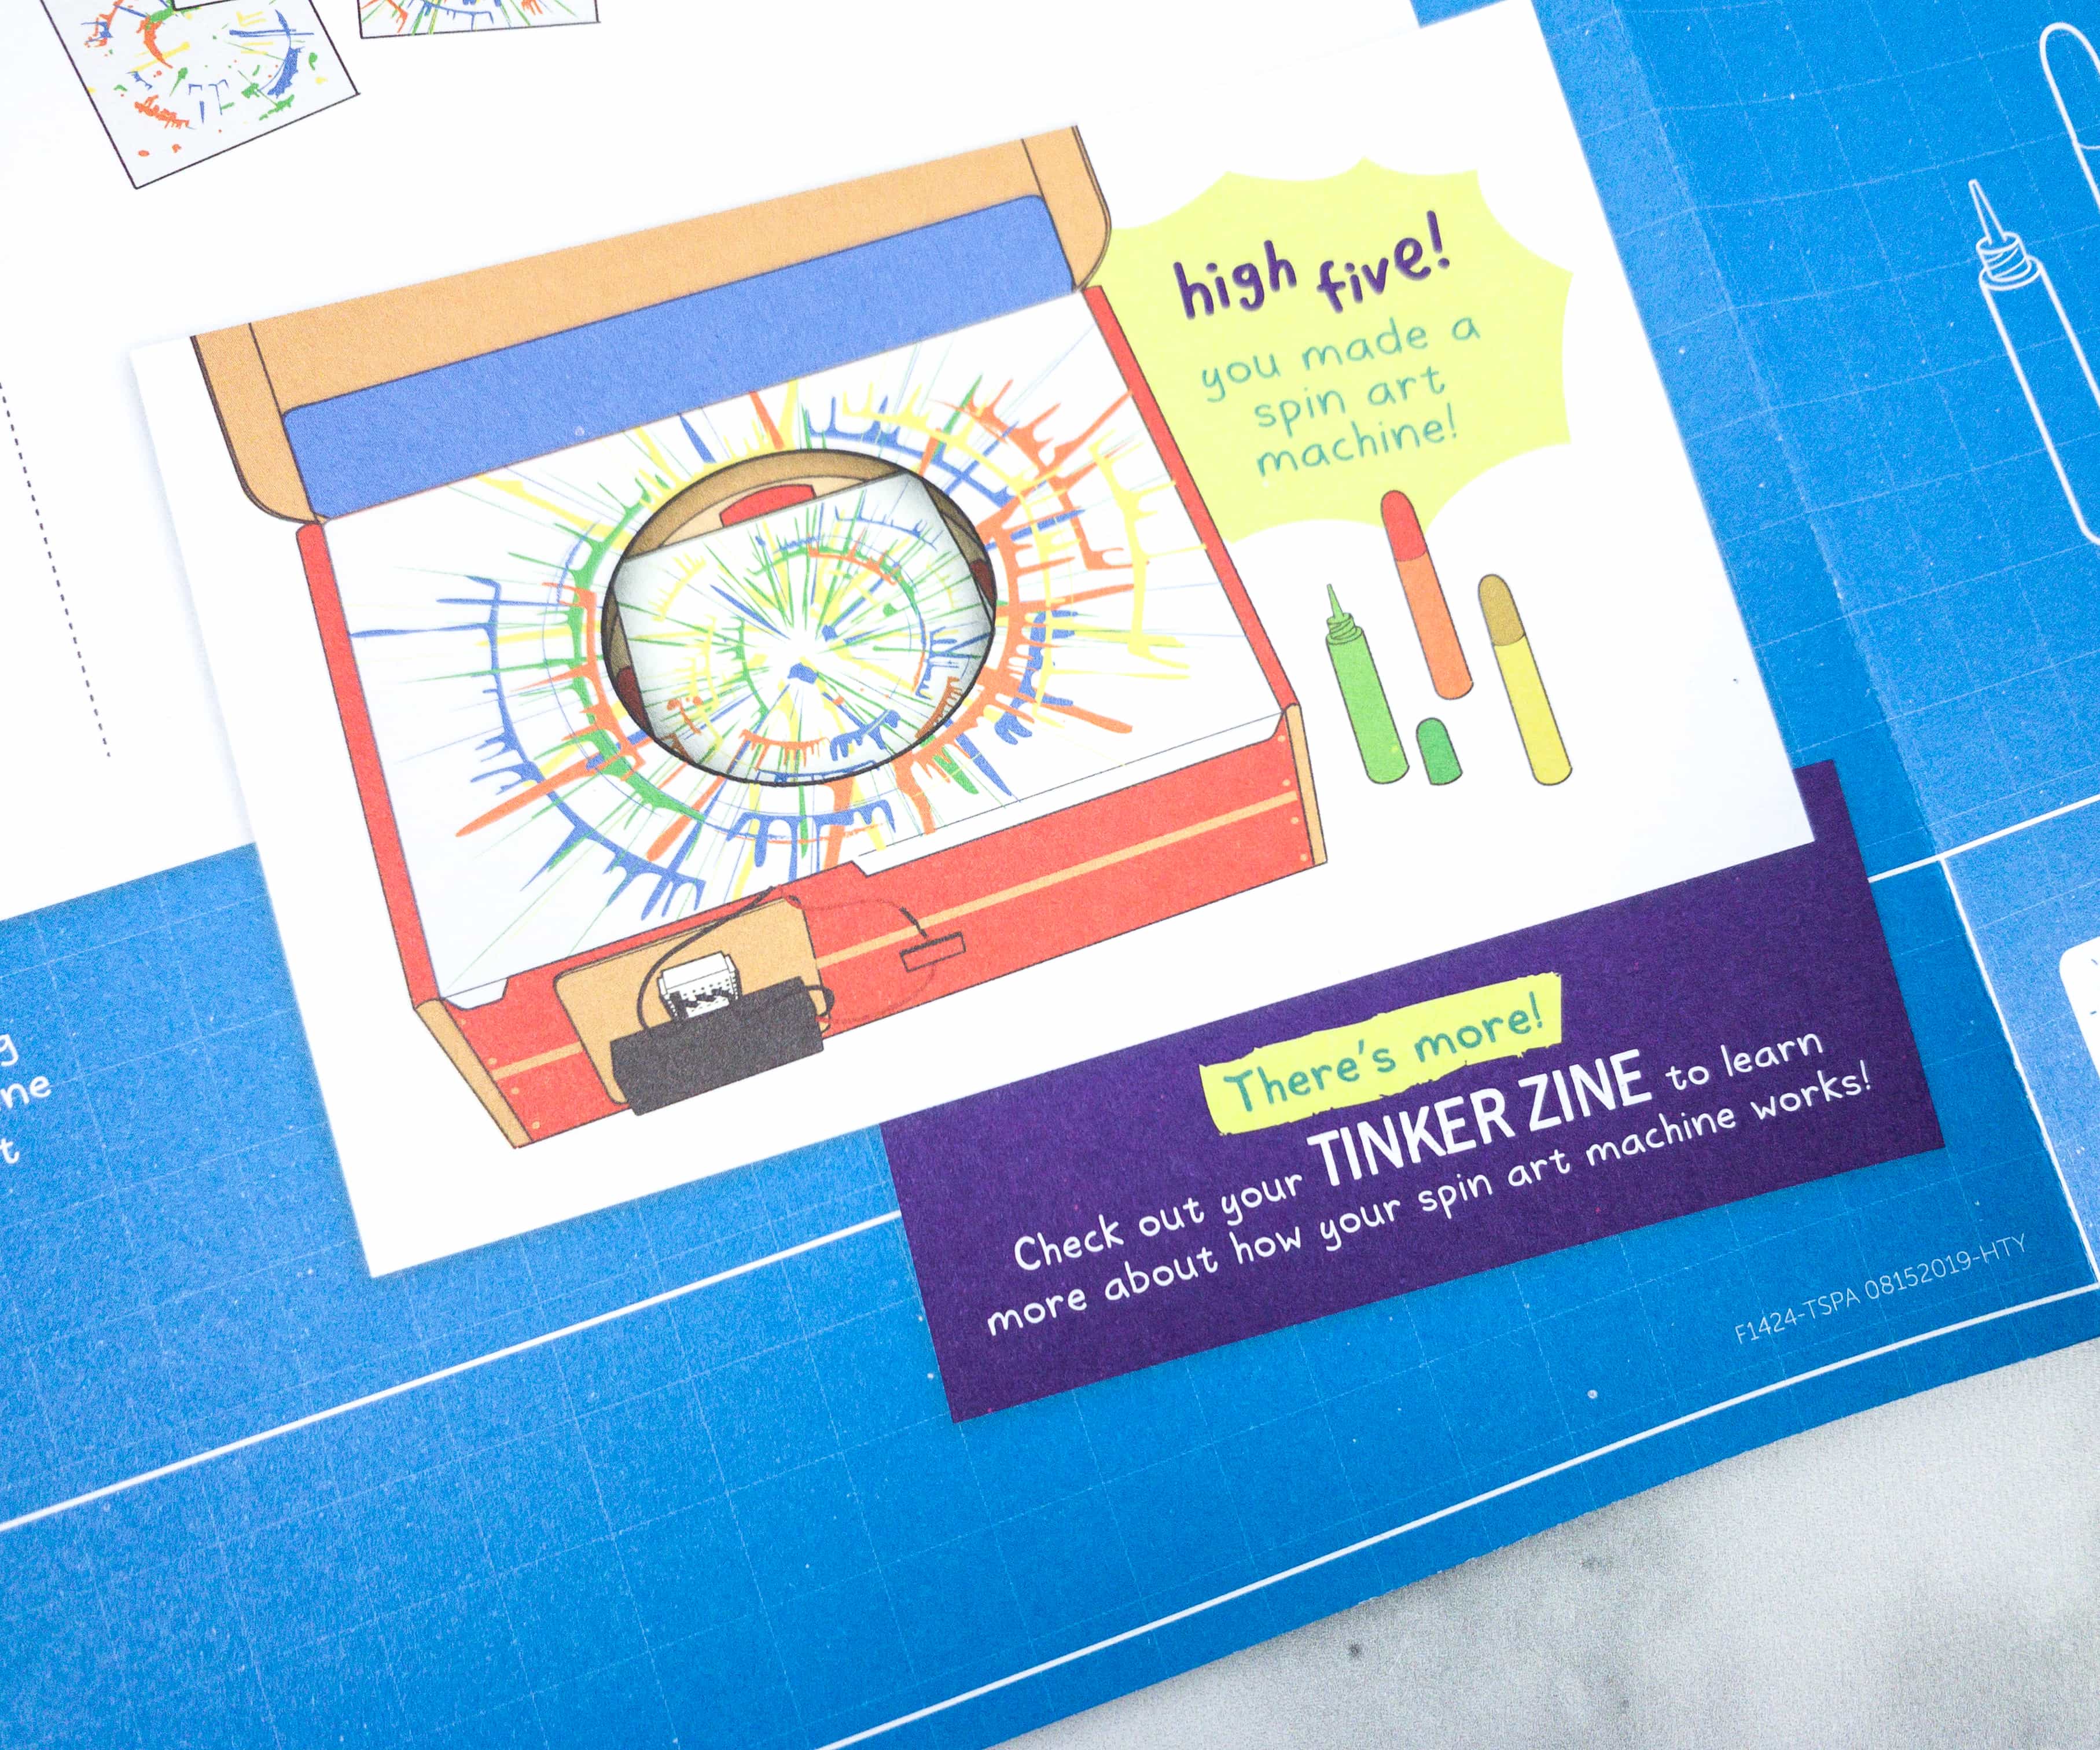 Build a Spin Art Machine, Tinker Crate Project Instructions